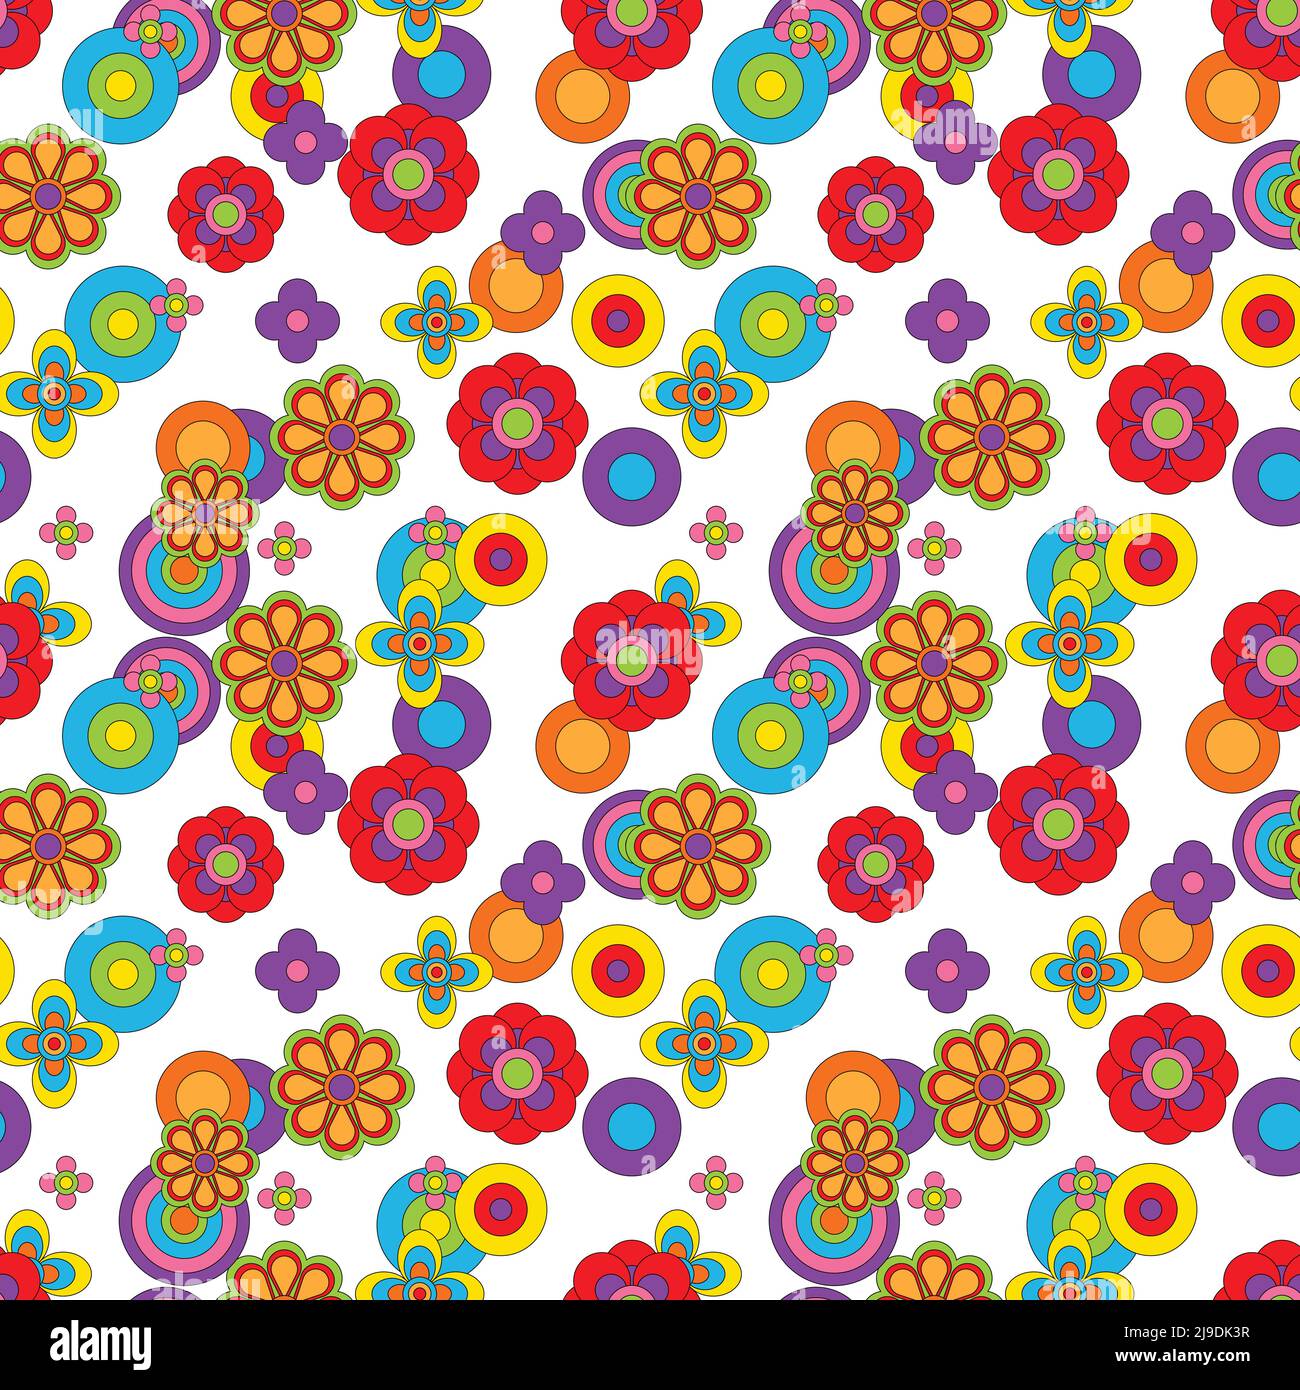 Abstract flower groovy psychedelic pattern. Stock Vector